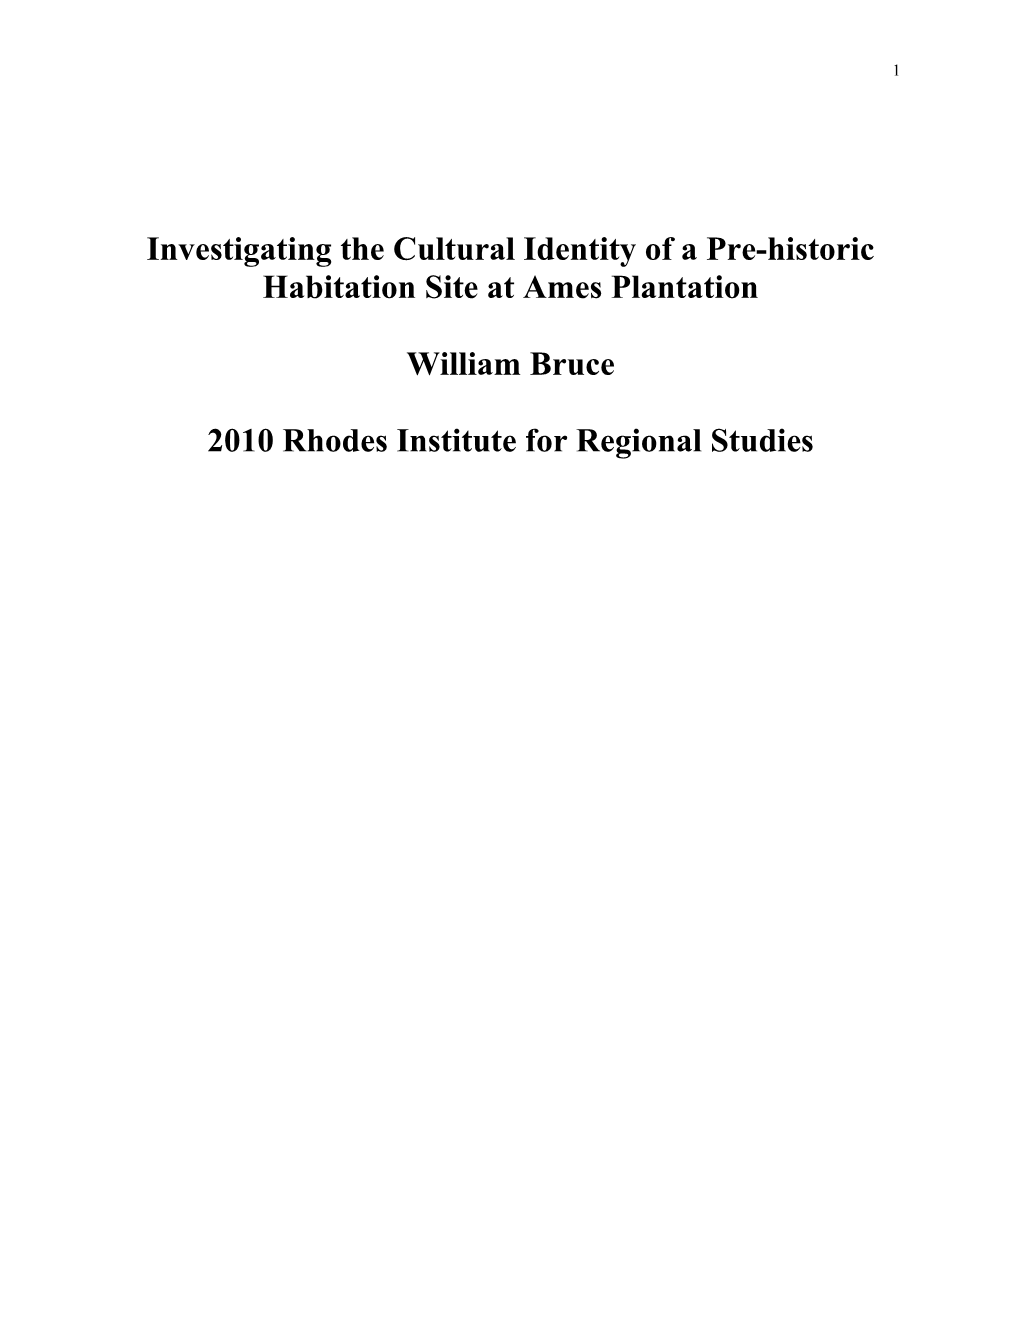 Investigating the Cultural Identity of a Pre-Historic Habitation Site at Ames Plantation